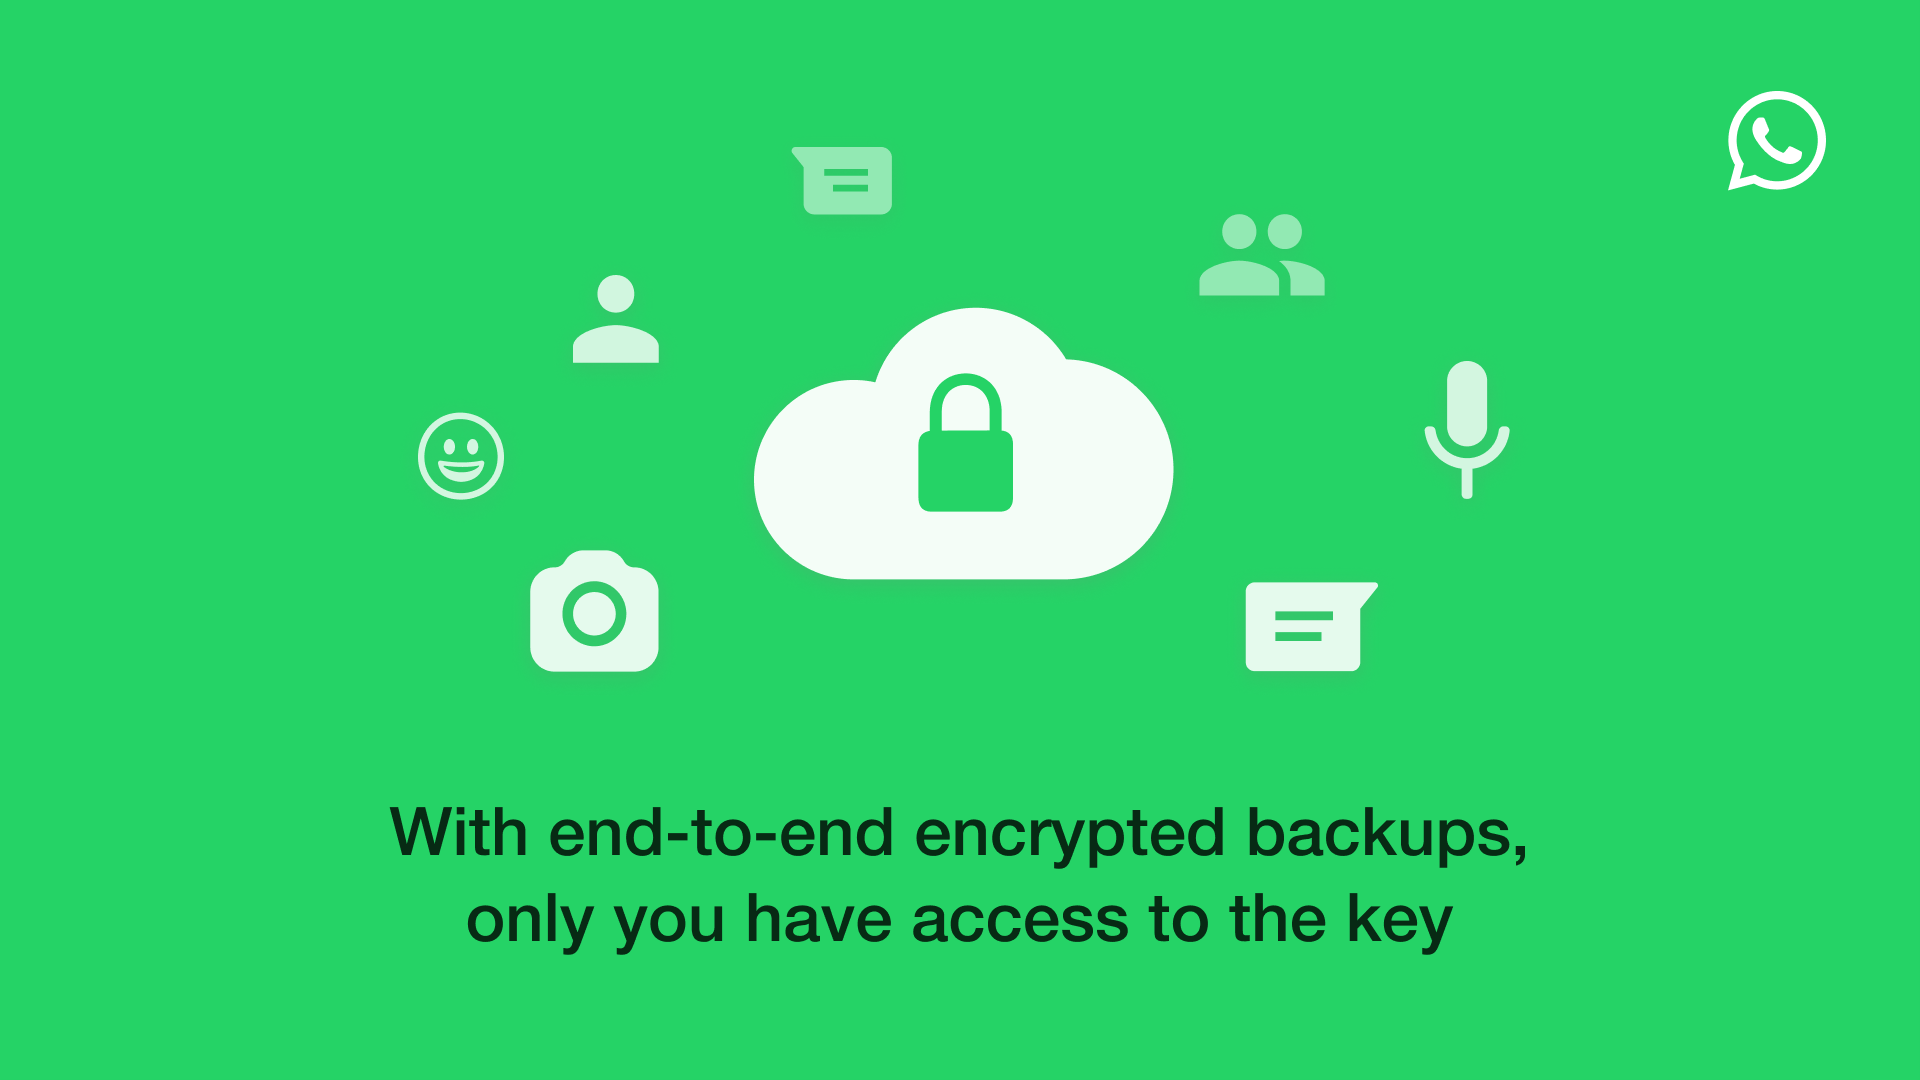 Meta's promotional image featuring a locked cloud icon set against a green background, with the tagline "With end-to-end encrypted backups, only you have access to the key"